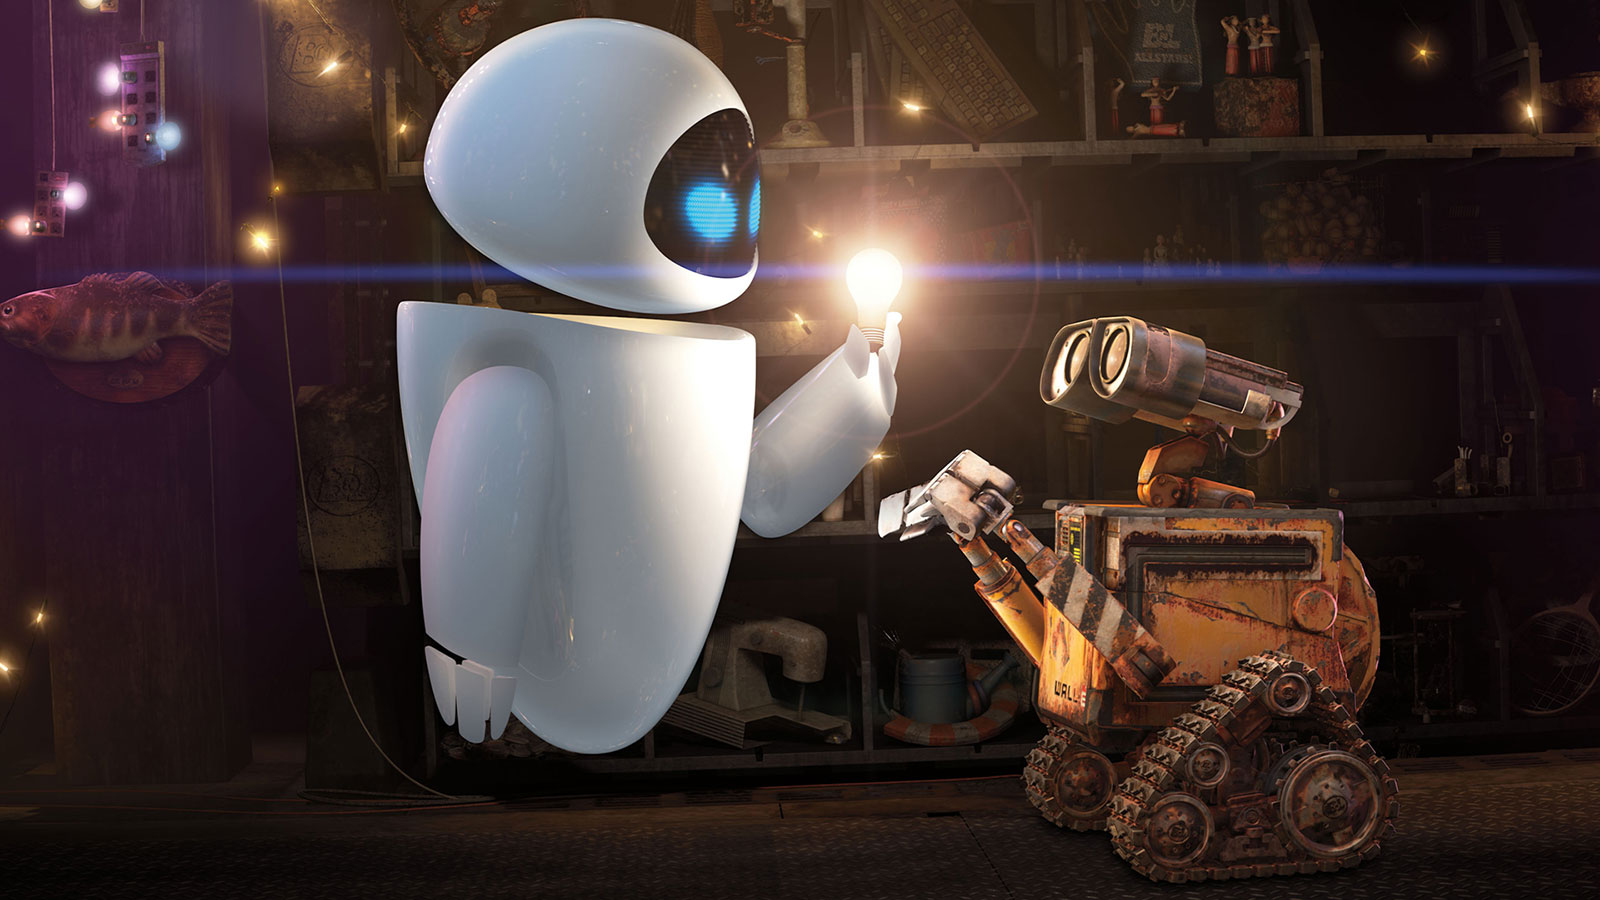 Hey, We Bet You Can’t Get Better Than 80% On This Random Knowledge Quiz WALL-E